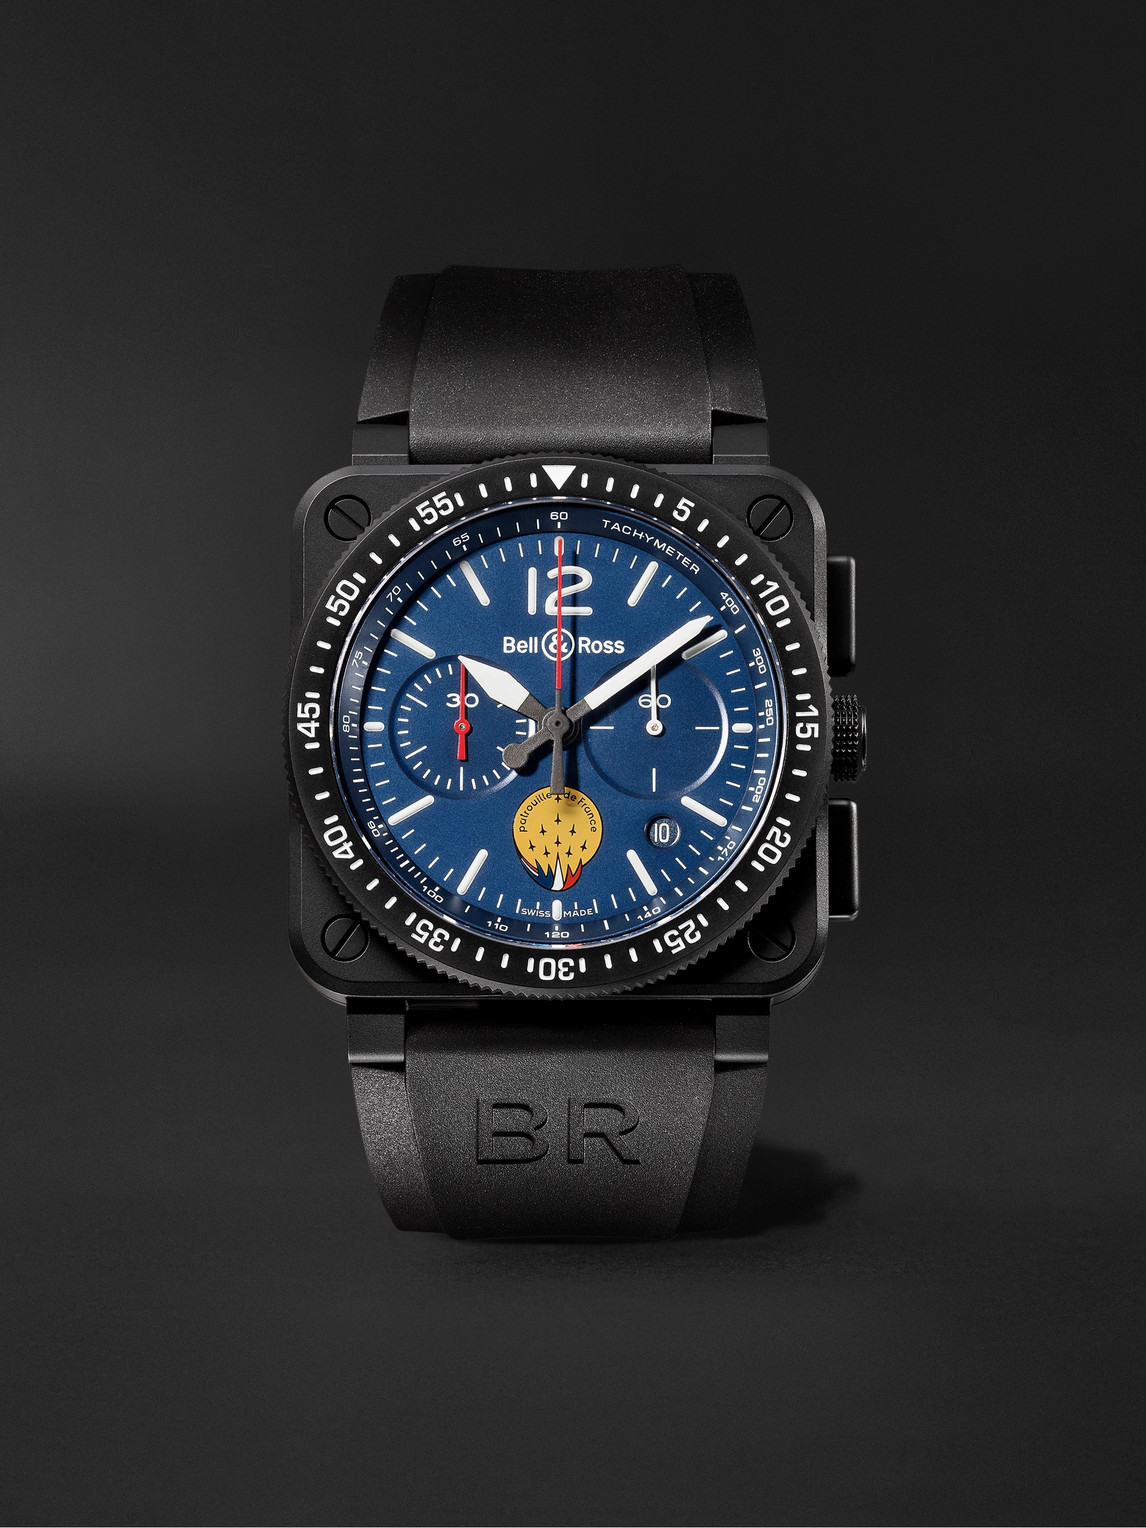 BR 03-94 Patrouille de France Limited Edition Chronograph Ceramic and Rubber Watch, Ref. No. BR0394-PAF1-CE/SRB